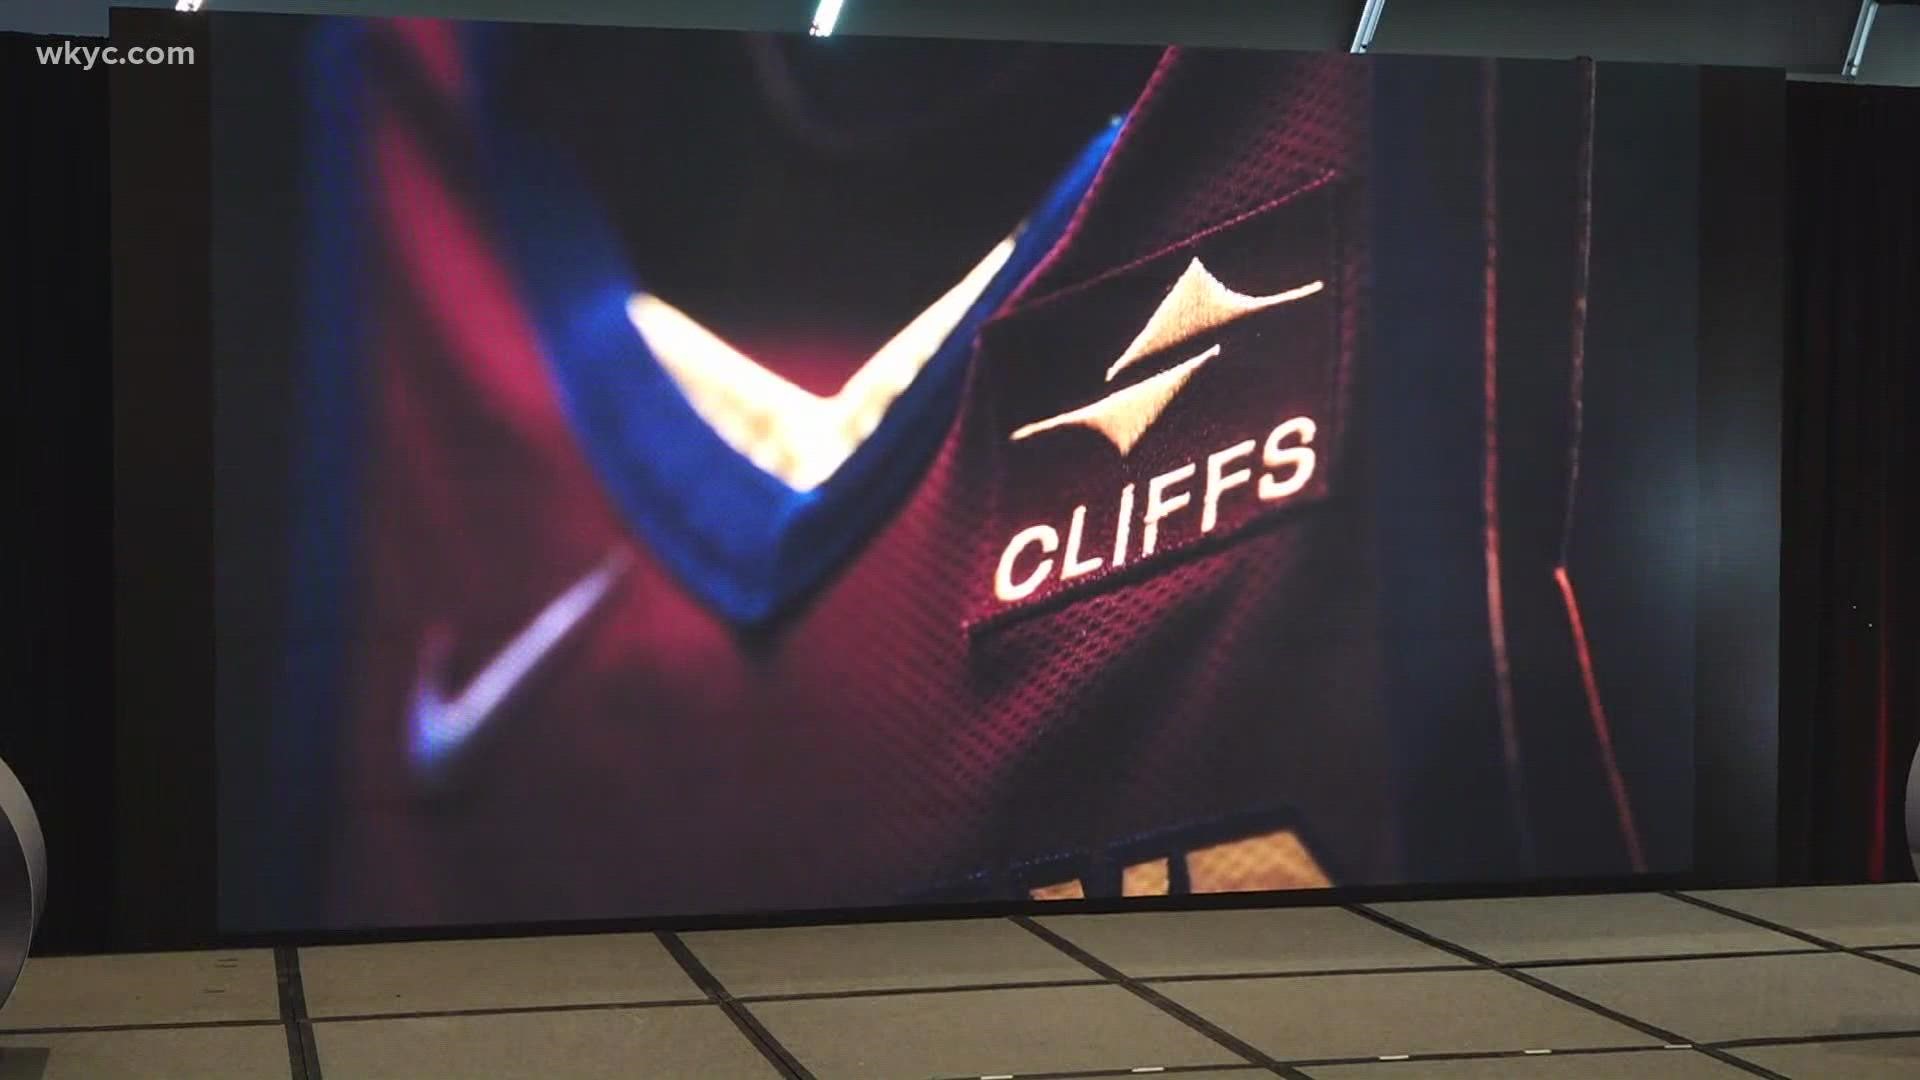 Cleveland Cavaliers announce Cliffs as new jersey sponsor